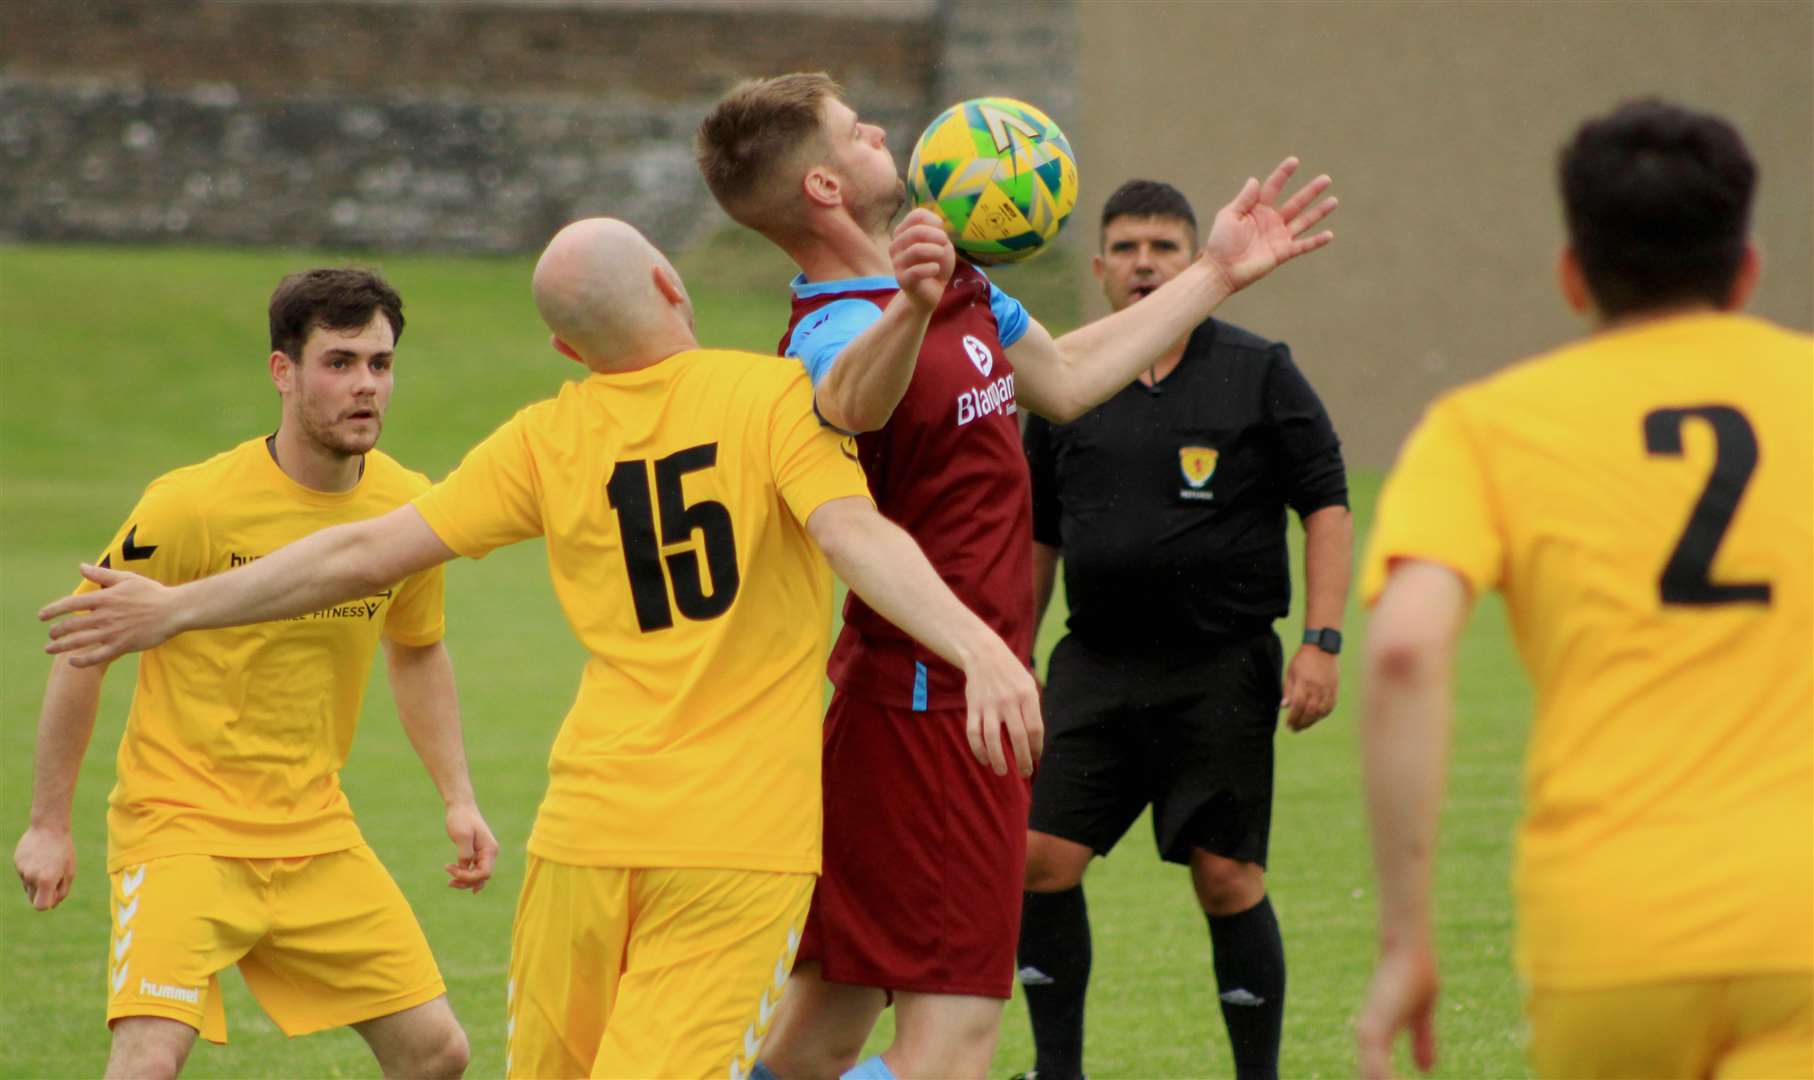 Pentland United's Marc Macgregor controls the ball on his chest against Staxigoe United.